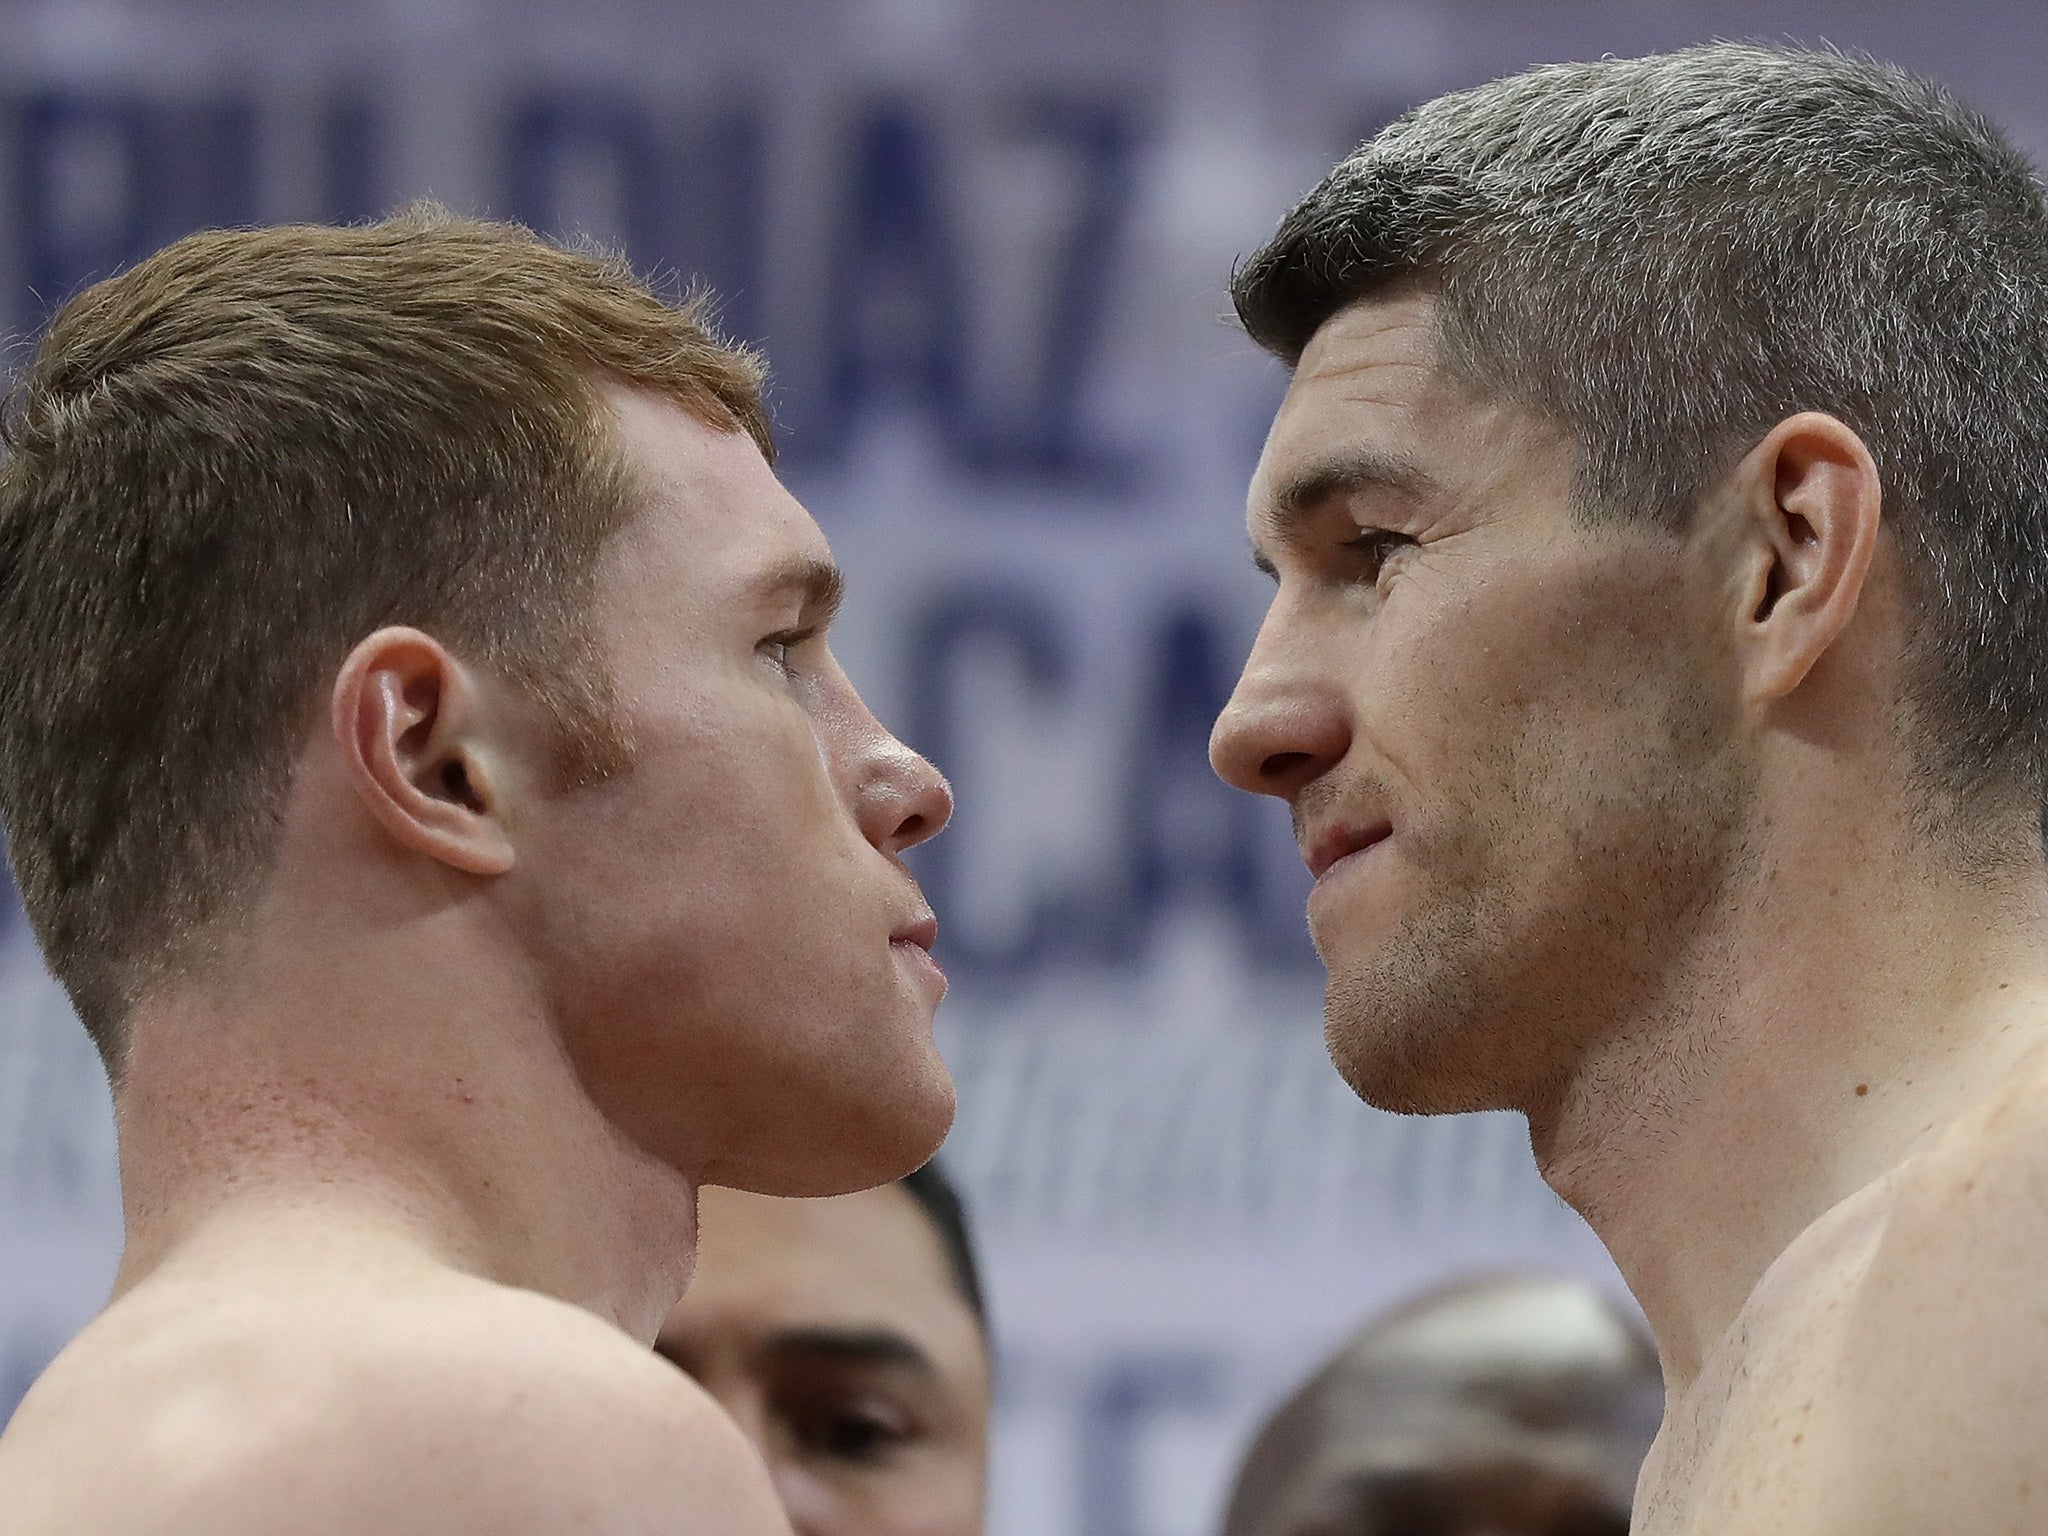 Liam Smith vs Canelo Alvarez What time does it start, what TV channel is it on and where can I watch it? The Independent The Independent